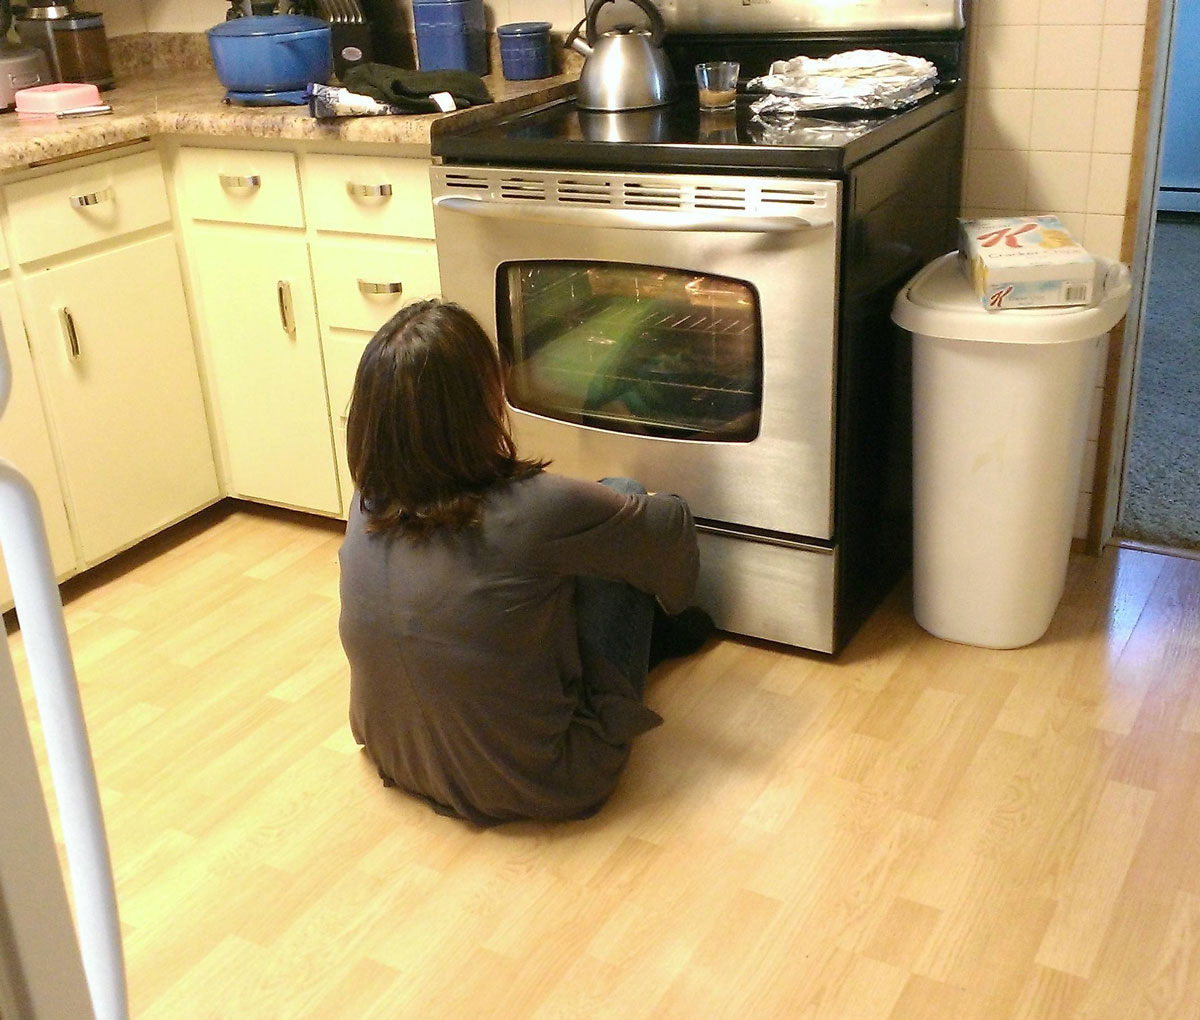 Mom got her first windowed oven